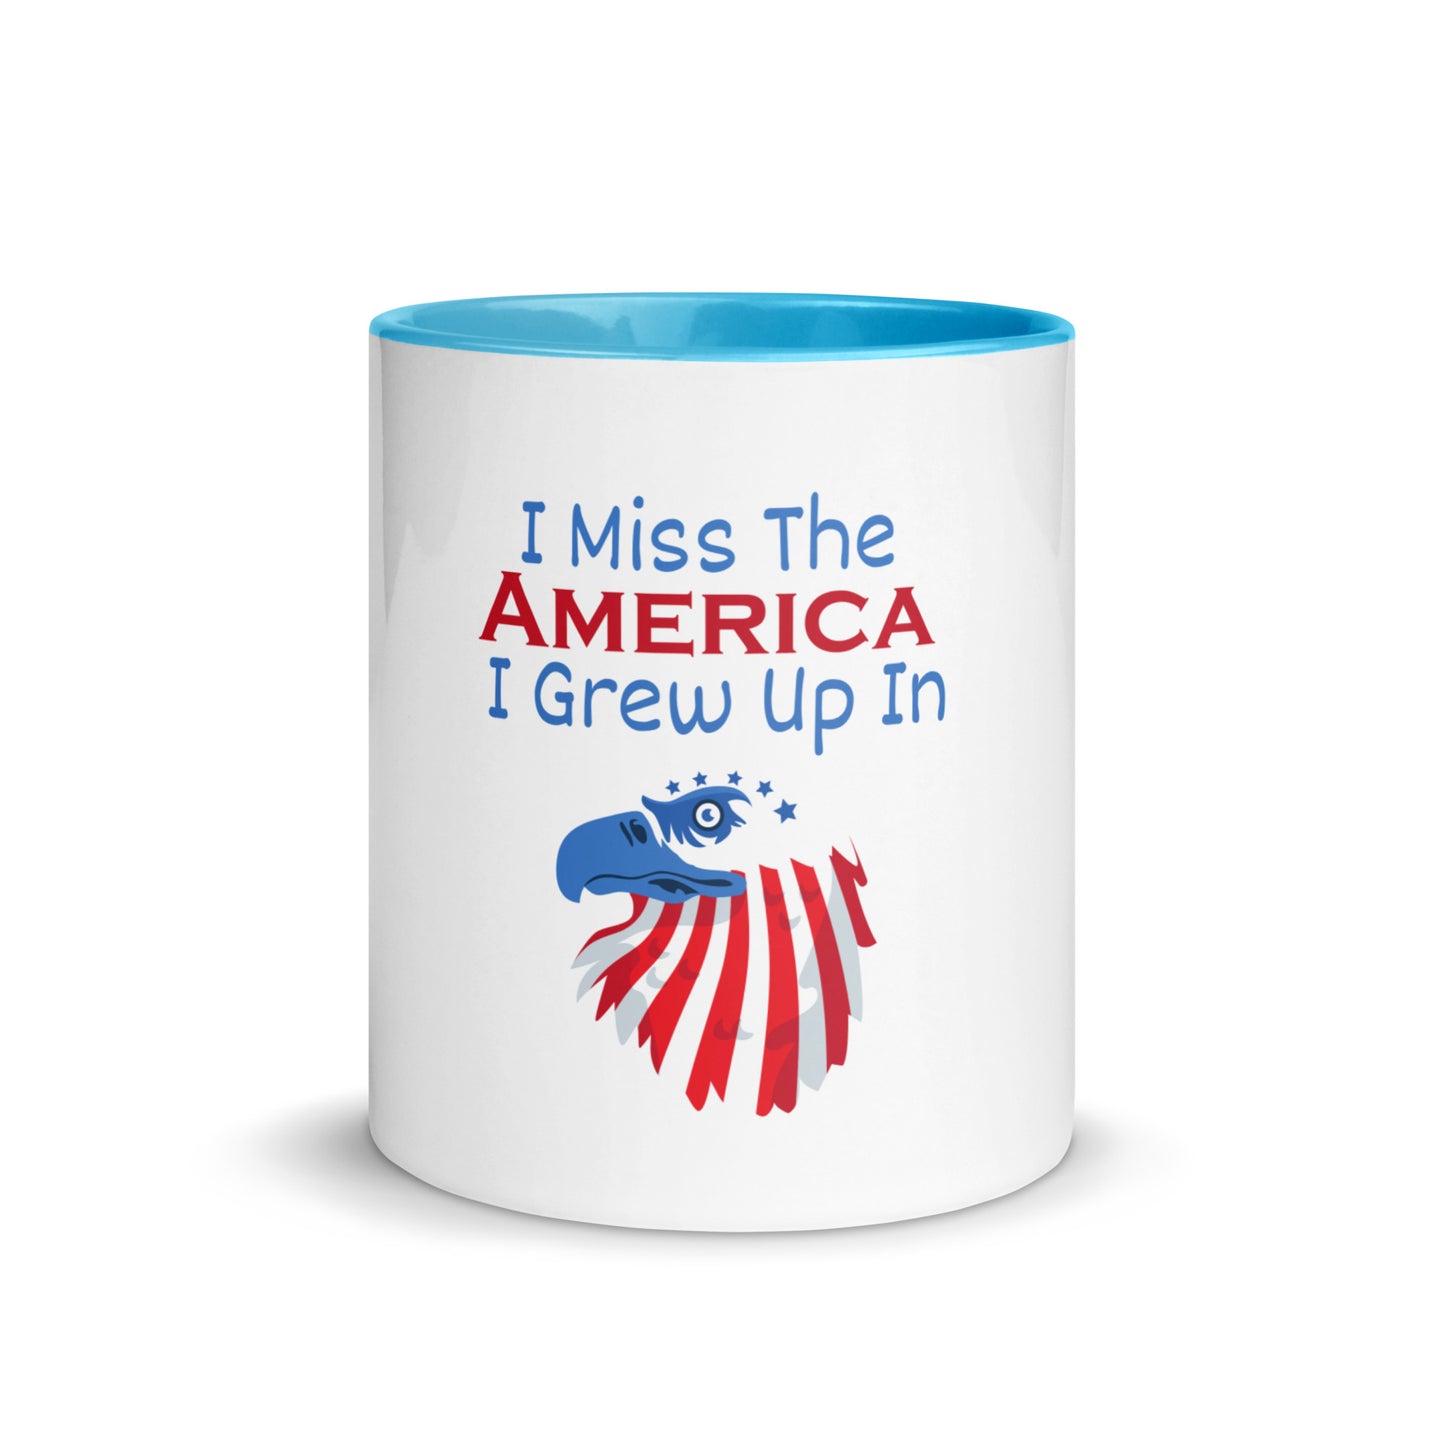 Dishwasher and microwave safe coffee cup with a heartfelt American message